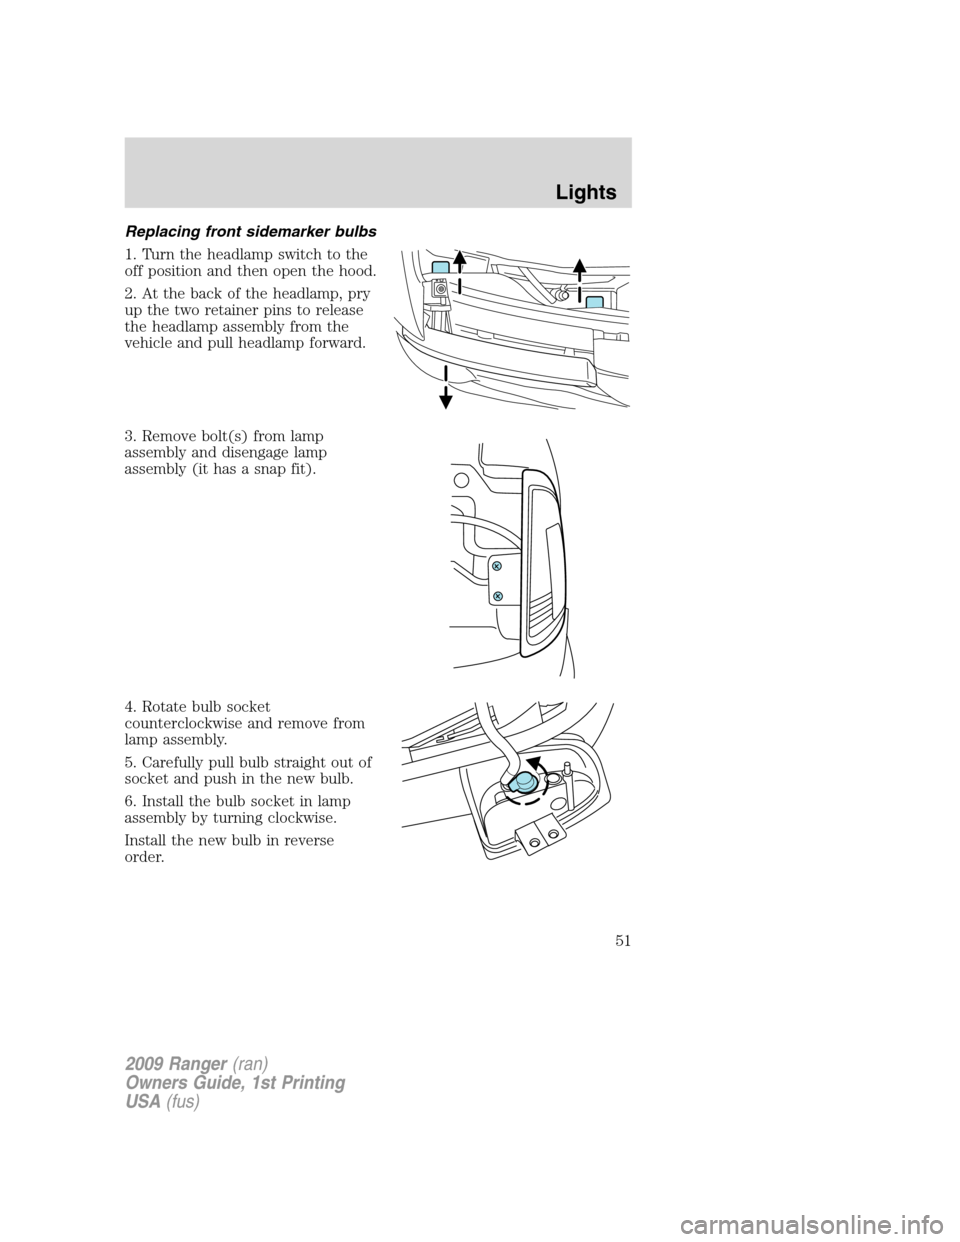 FORD RANGER 2009 2.G Owners Manual Replacing front sidemarker bulbs
1. Turn the headlamp switch to the
off position and then open the hood.
2. At the back of the headlamp, pry
up the two retainer pins to release
the headlamp assembly f